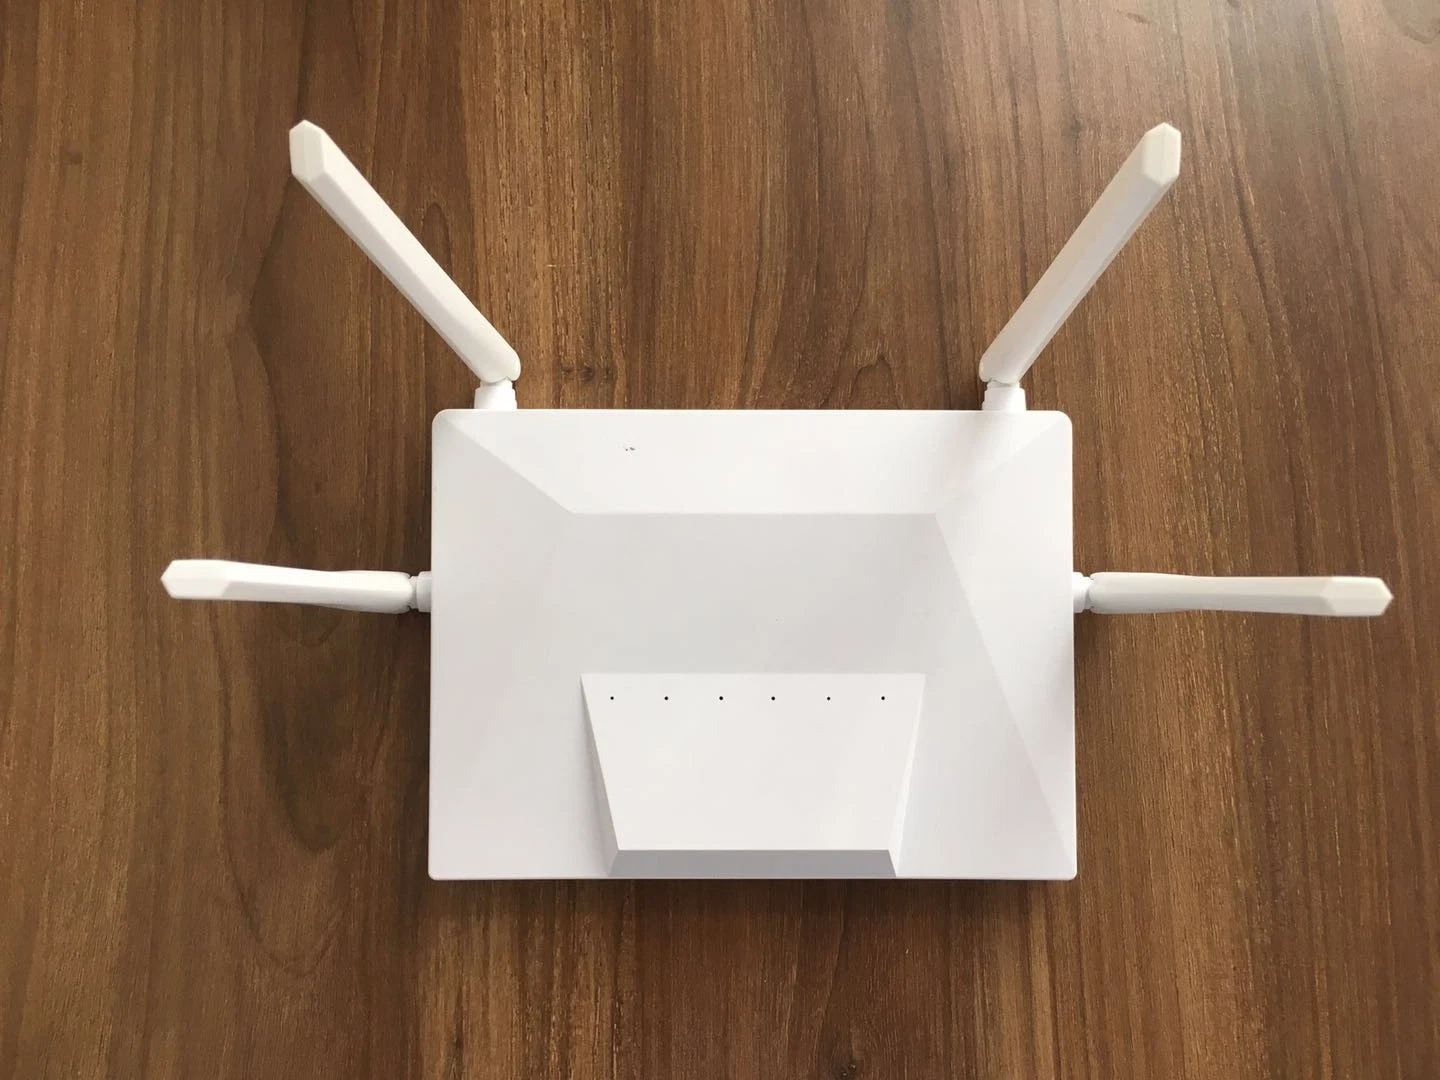 Support 2g/3G/4G Network, LTE Bands Can Be Customized WiFi Router up to 32 Users